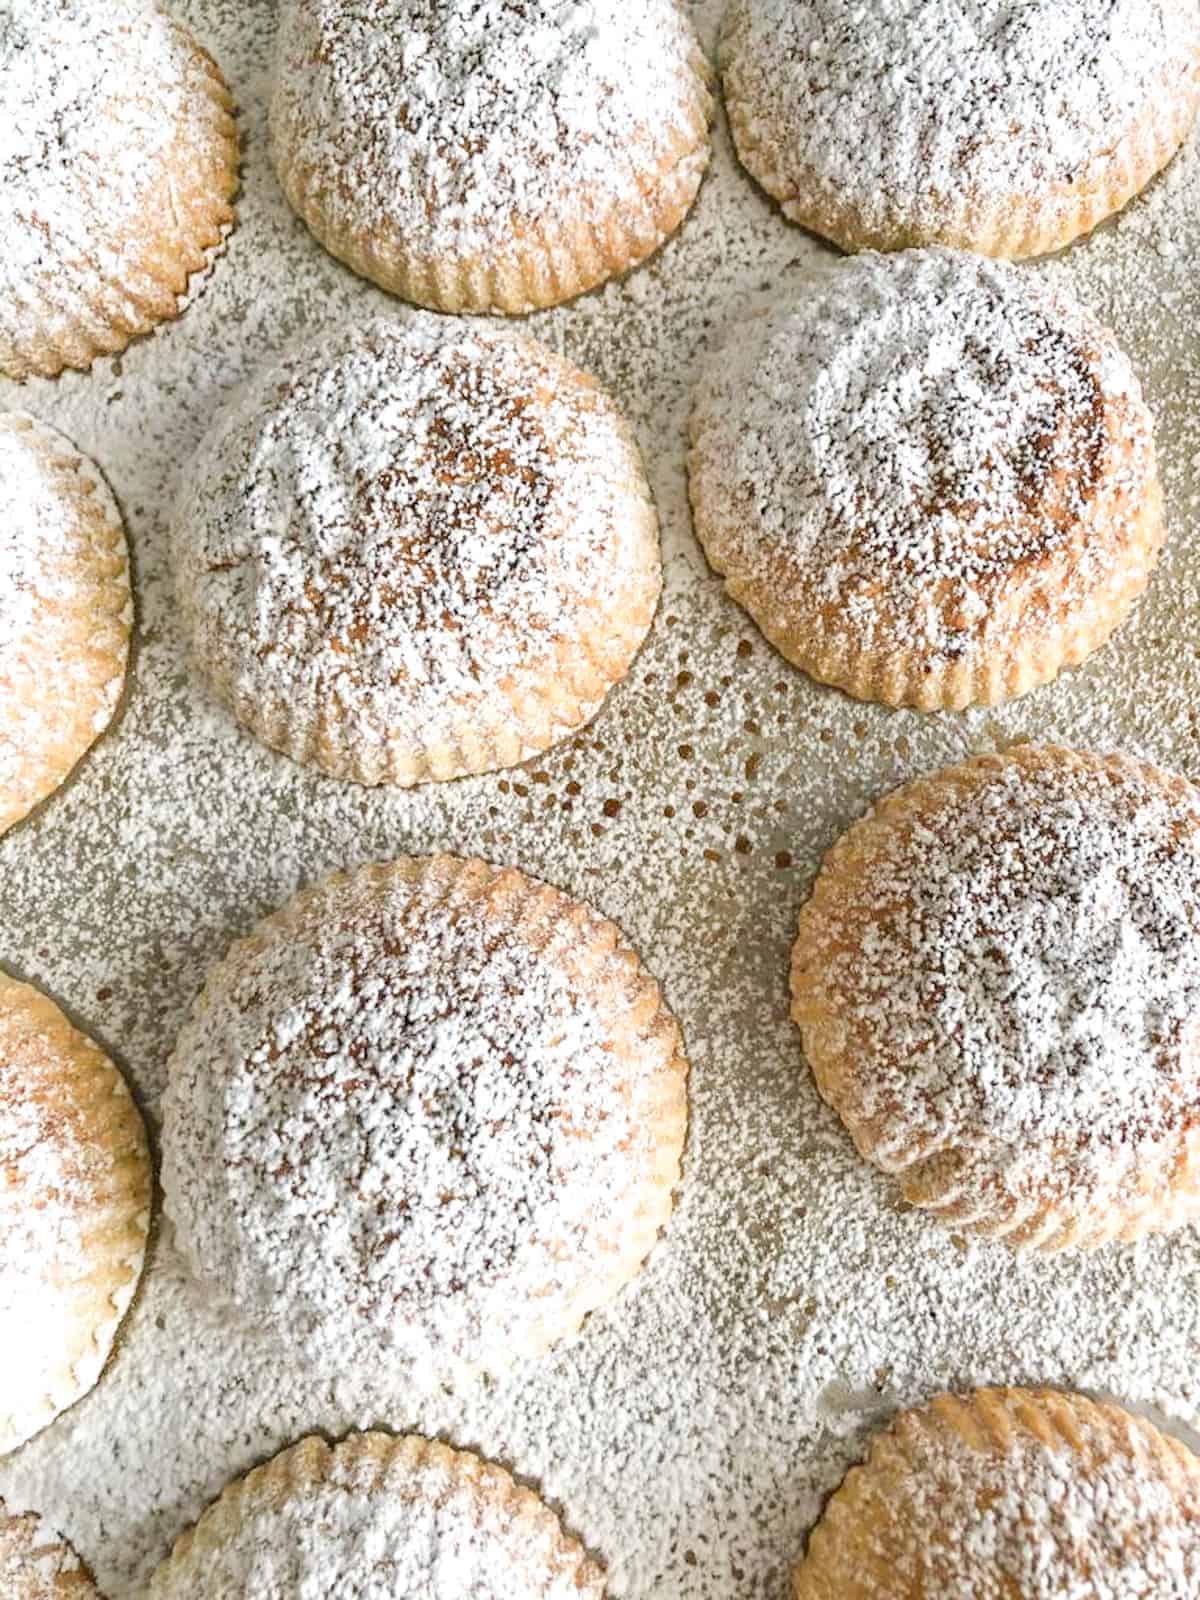 Lebanese Maamoul cookies filled with pistachios and topped with powdered sugar.